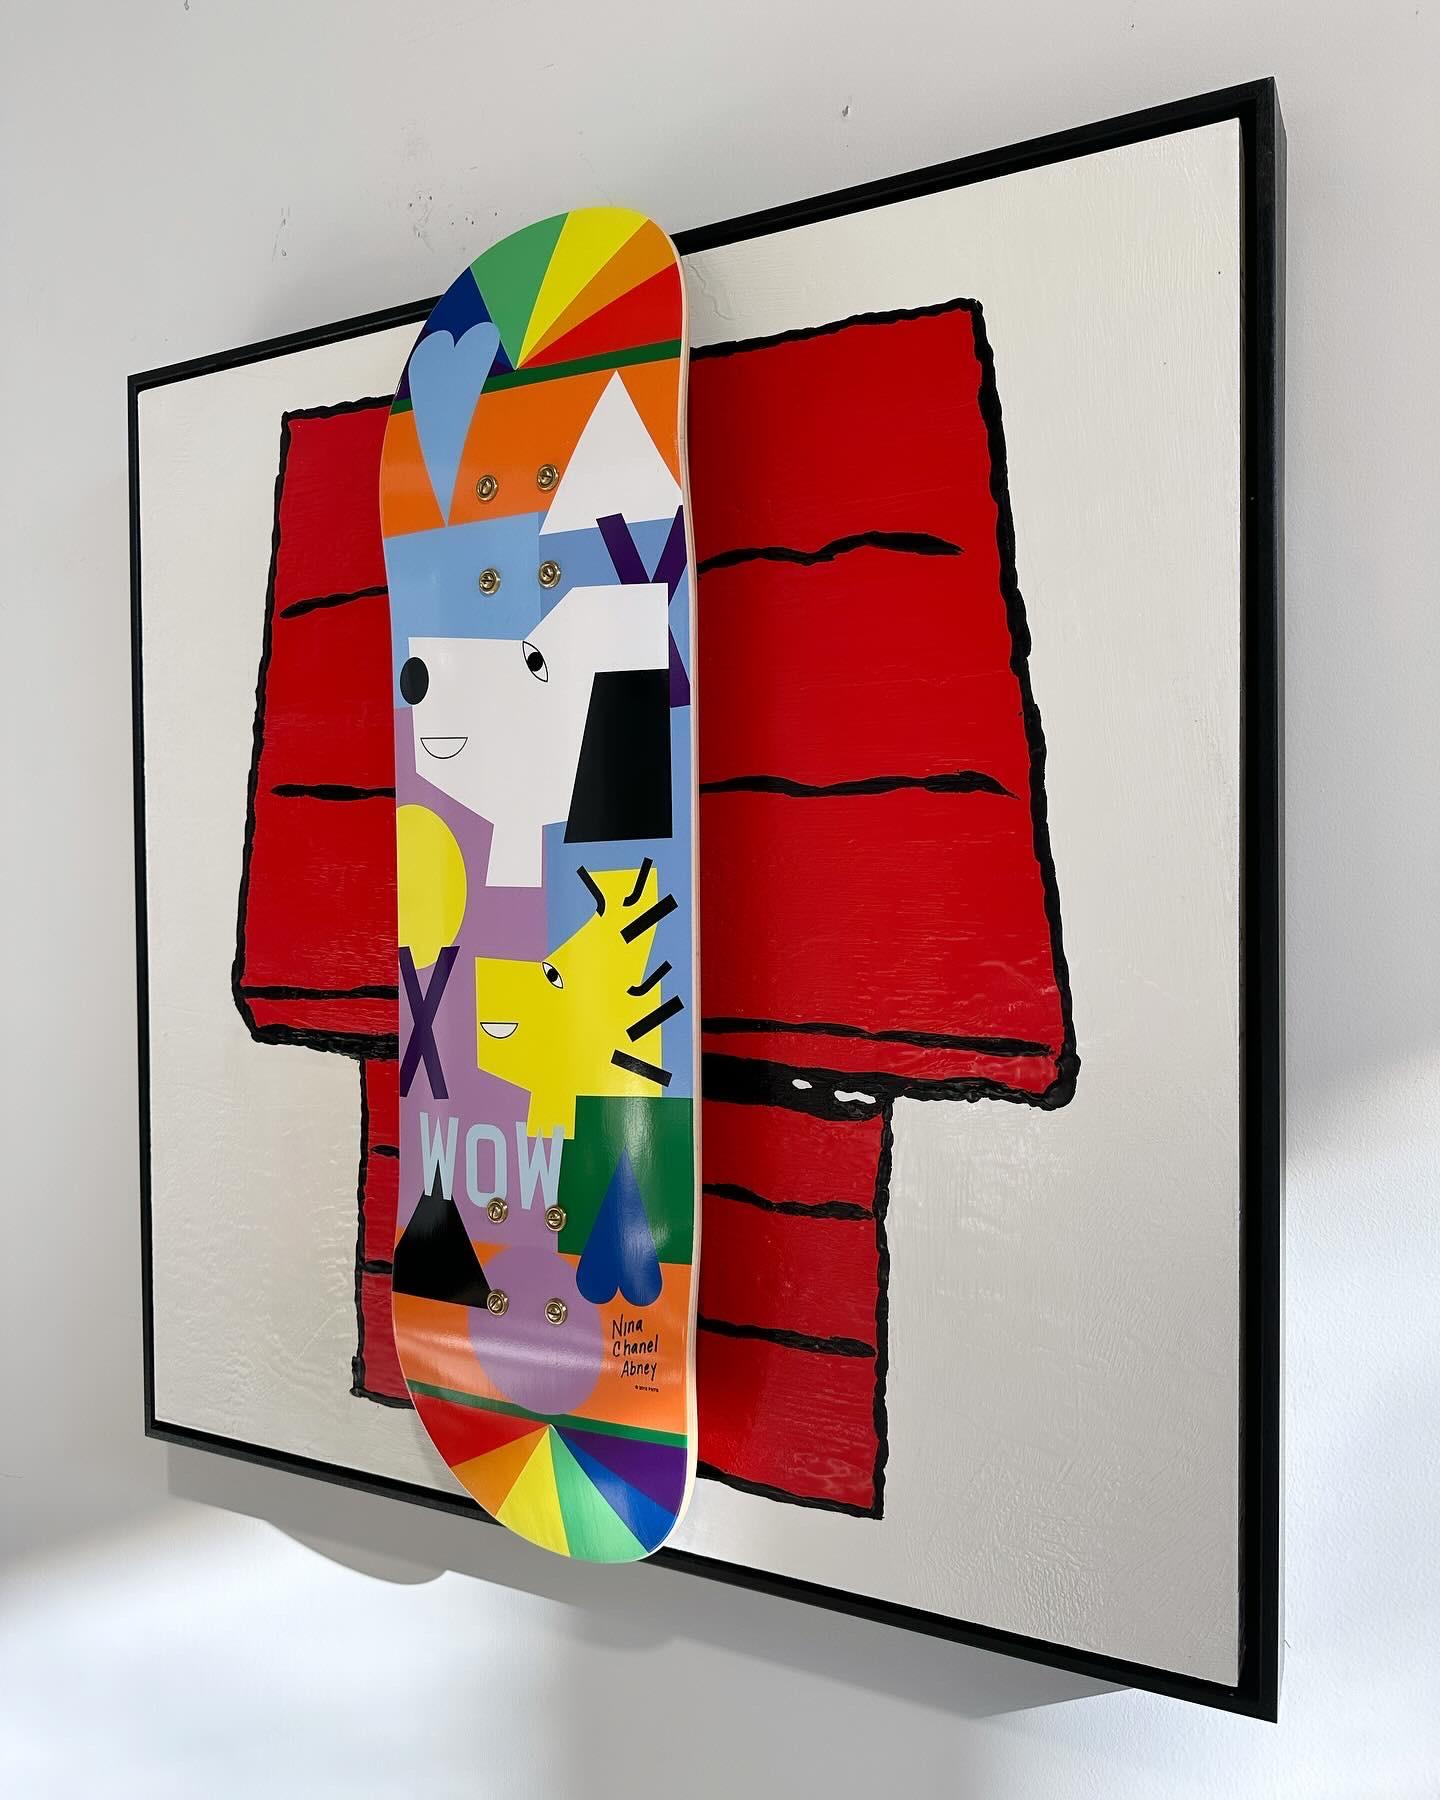 In Deck series. Encaustic and Nina Chanel Abney Peanuts Skate Deck float-mounted on board.

Art Dimensions: 30 x 30 H inches and Framed Dimensions: 31 W x 31 H inches. 

About the Deck | This Abney artwork was made in collaboration with the Peanuts